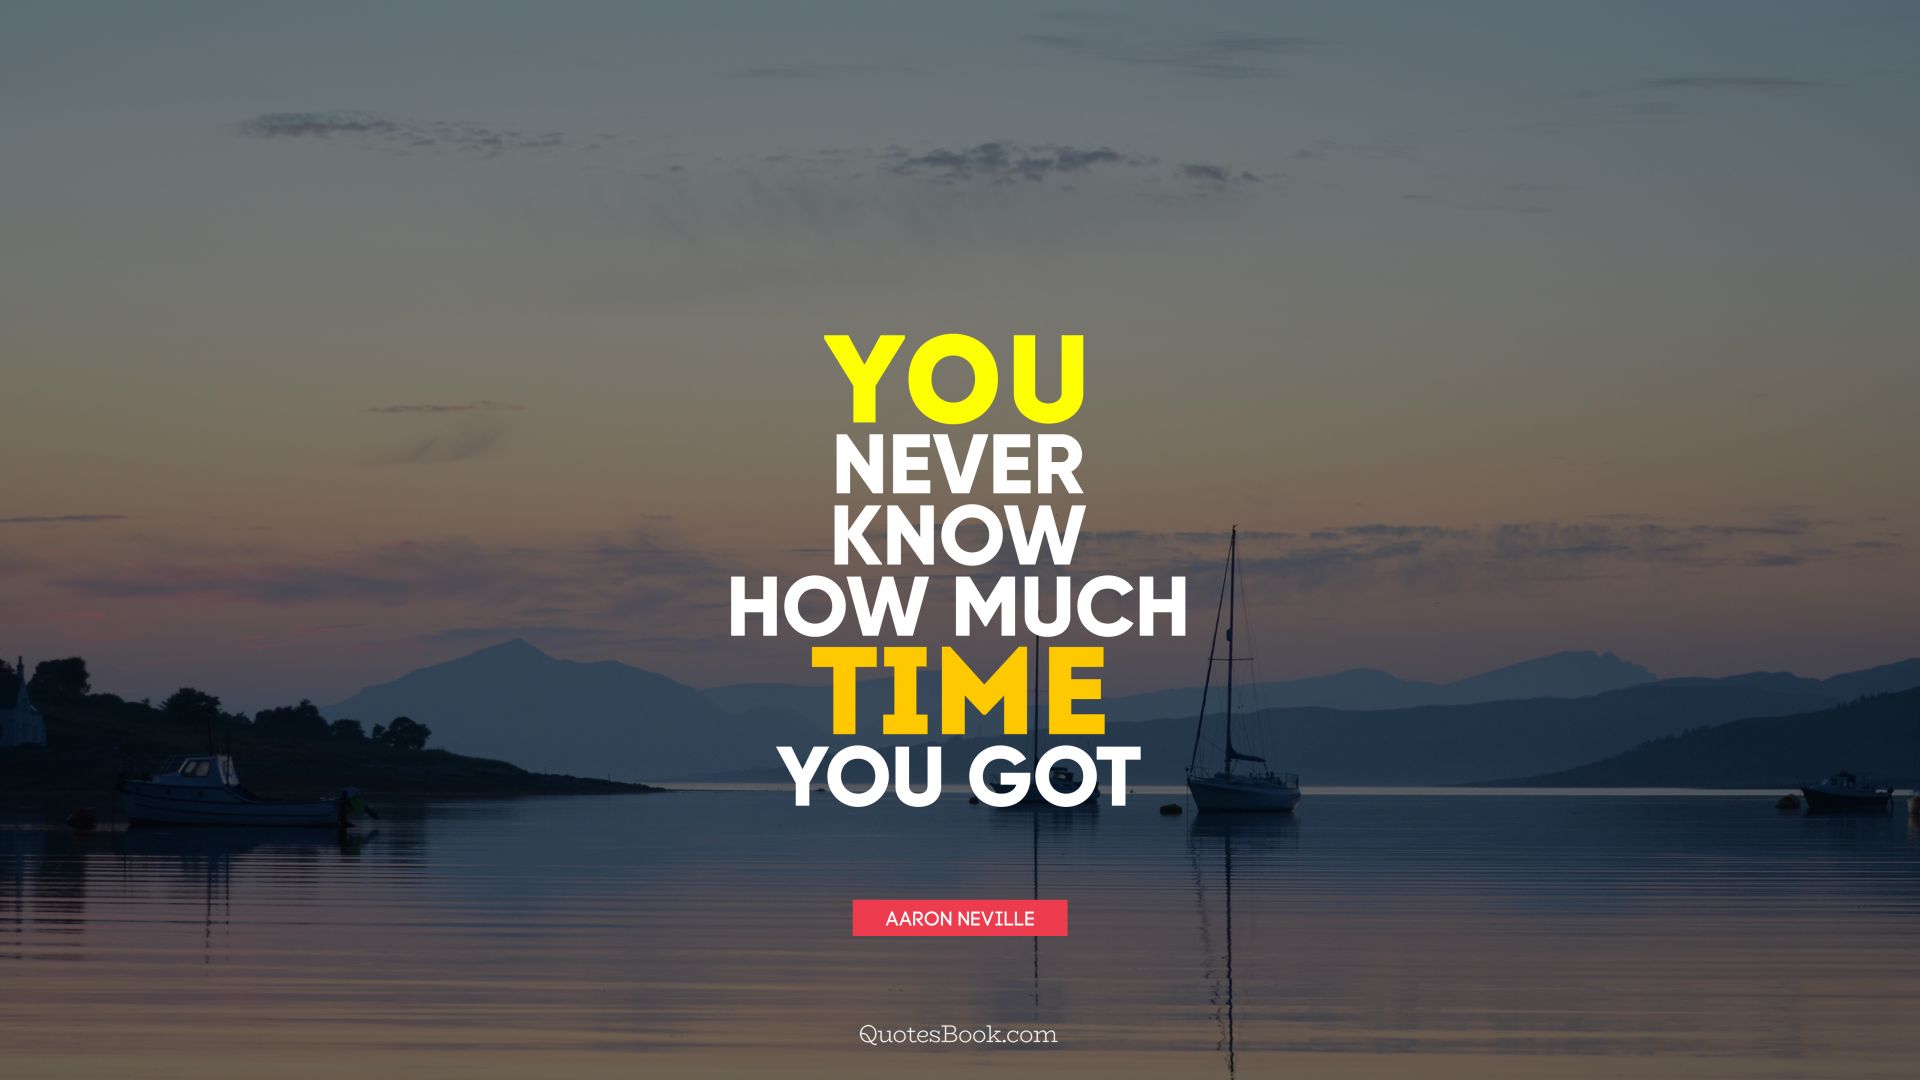 You never know how much time you got. - Quote by Aaron Neville